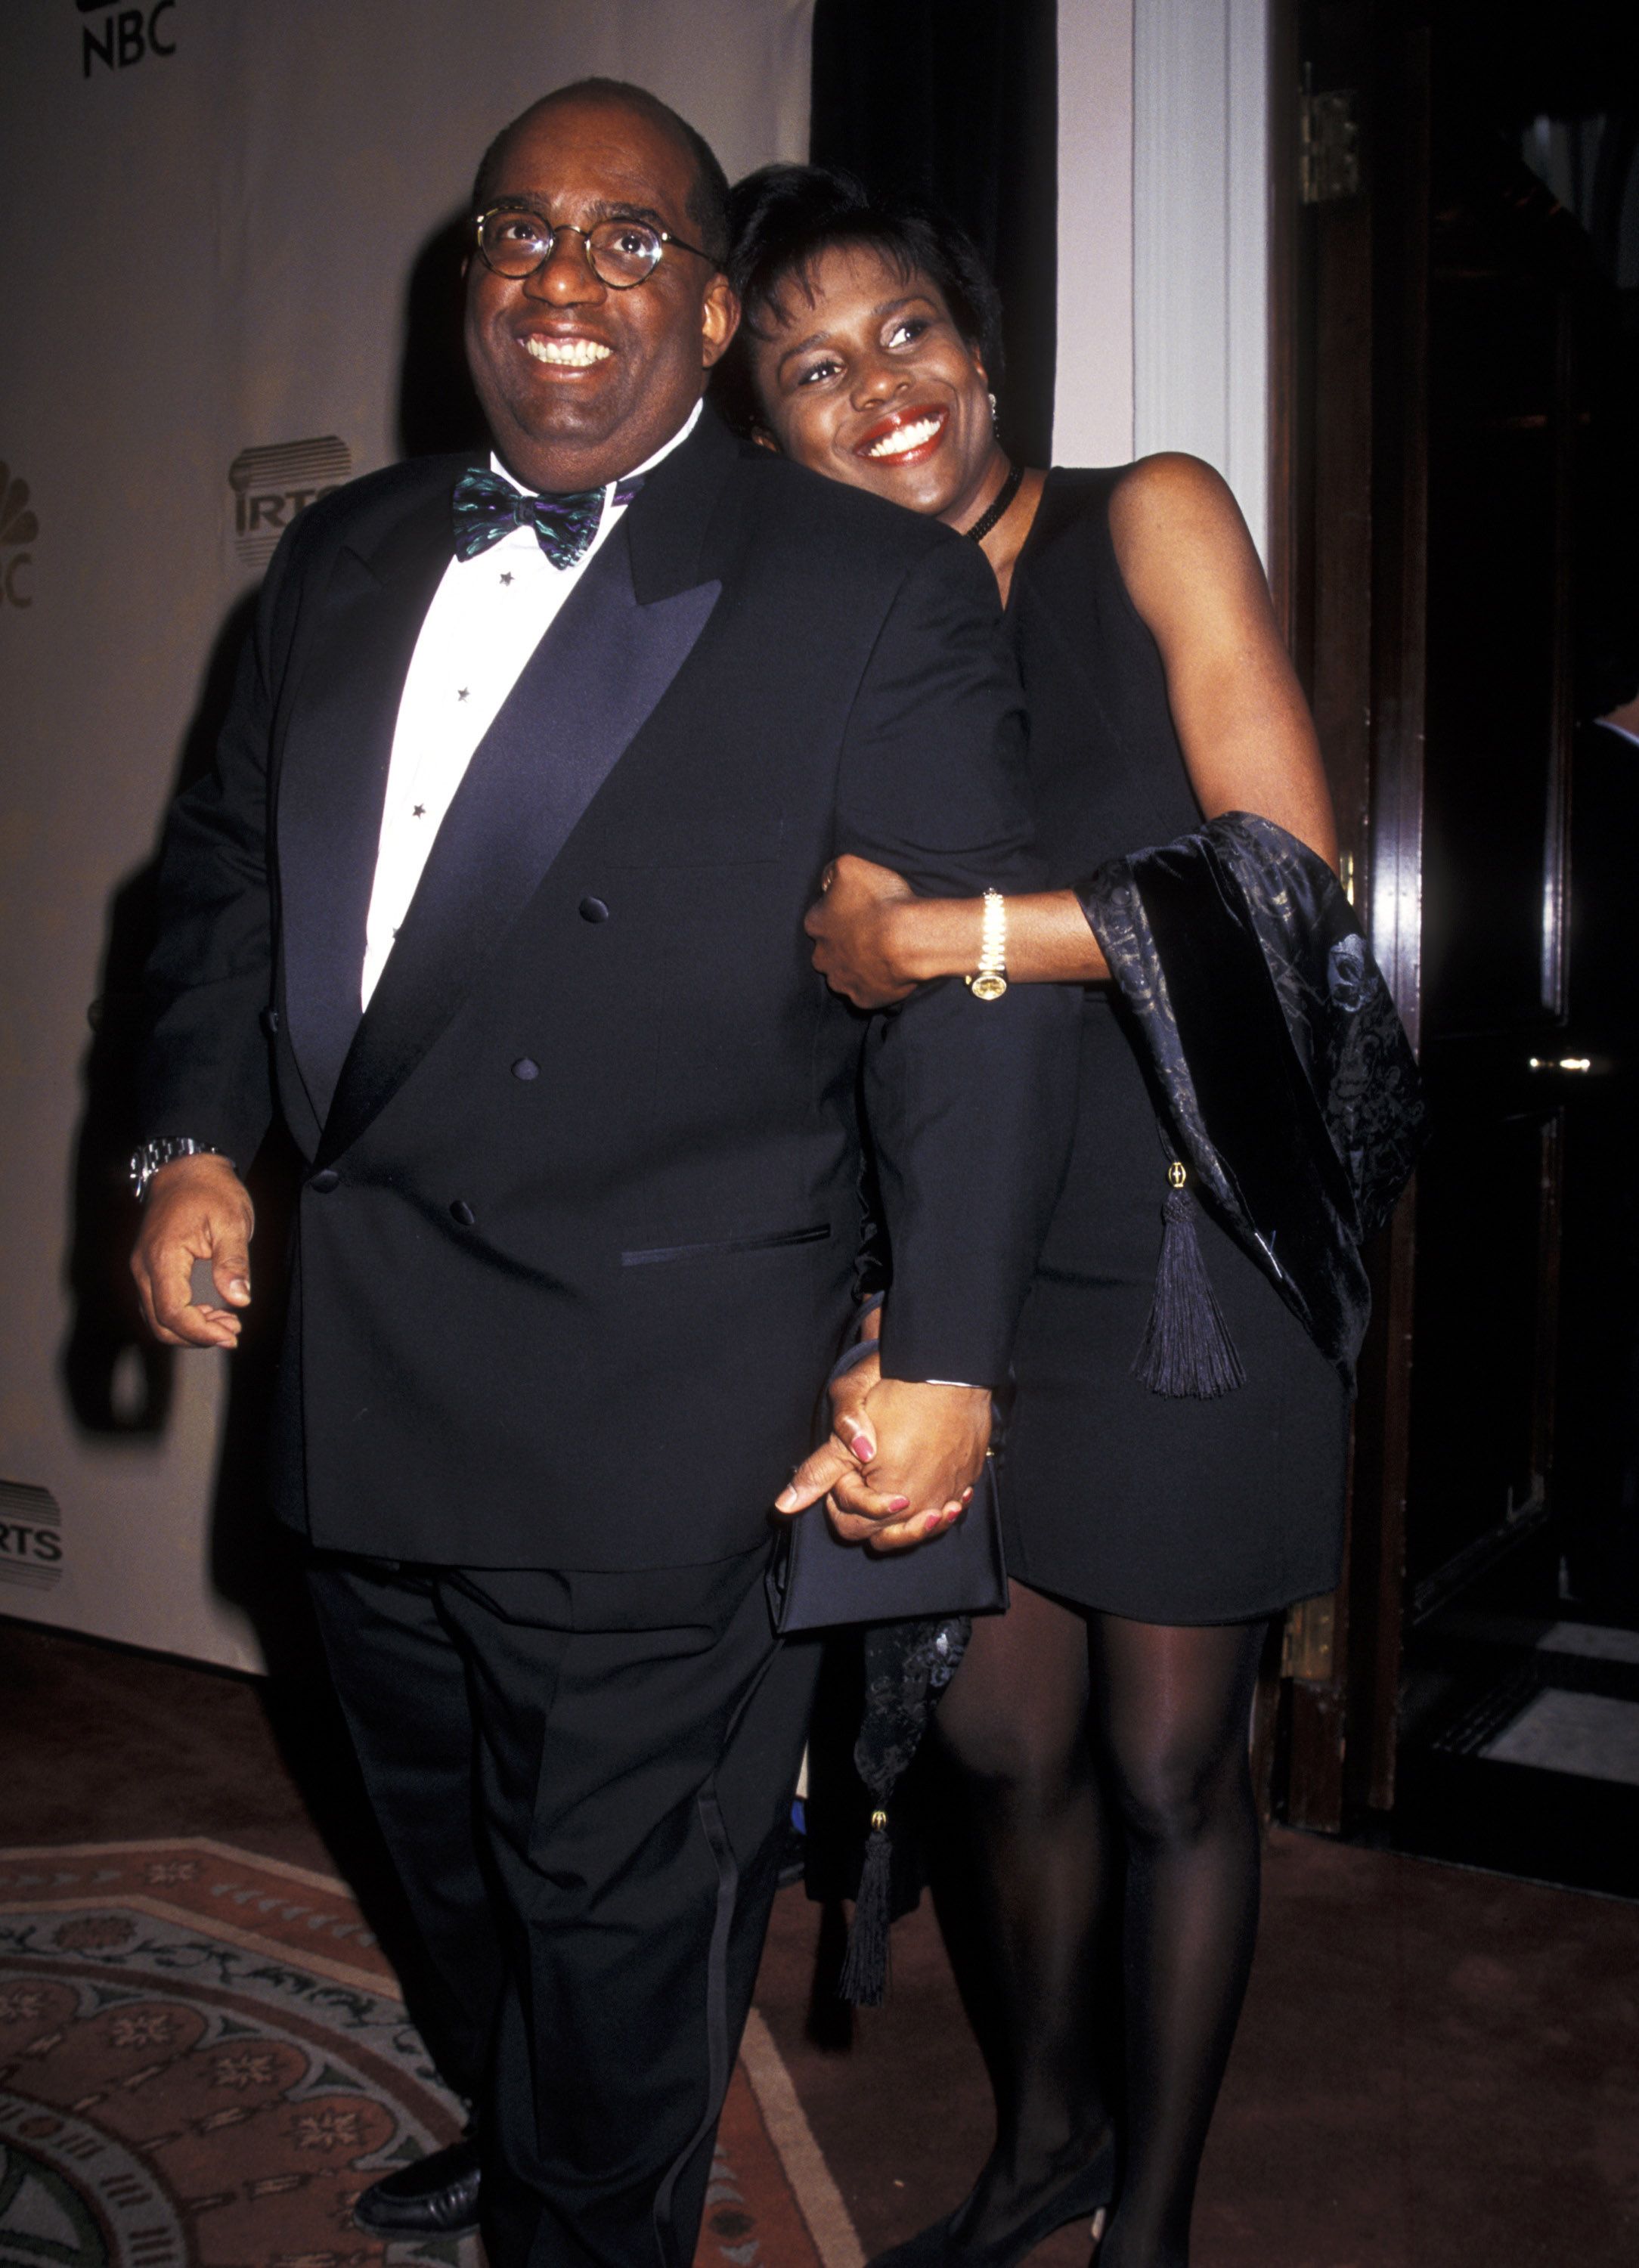 Al Roker and Deborah Roberts at the IRTS Foundation Gold Medal Award Honors Robert Wright in New York City, on February 26, 1997. | Source: Getty Images